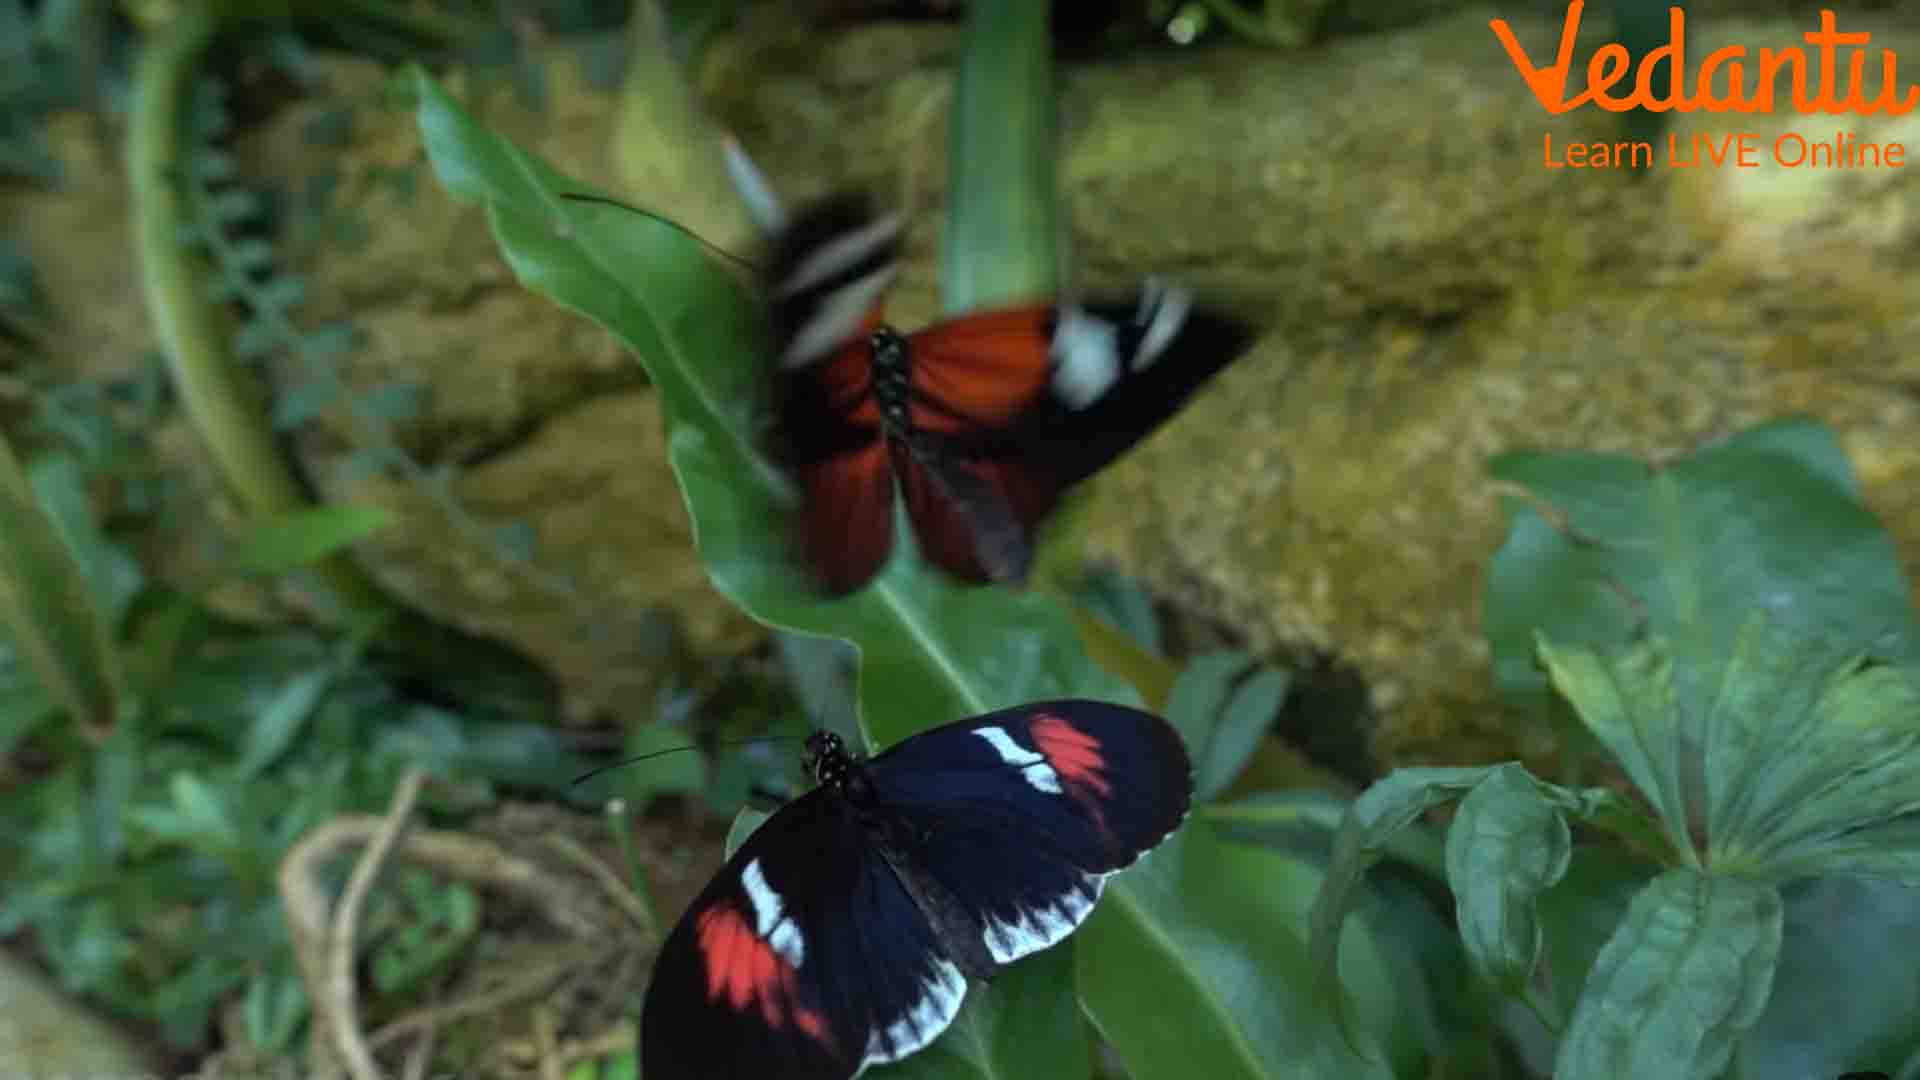 A butterfly flying with its unique pattern